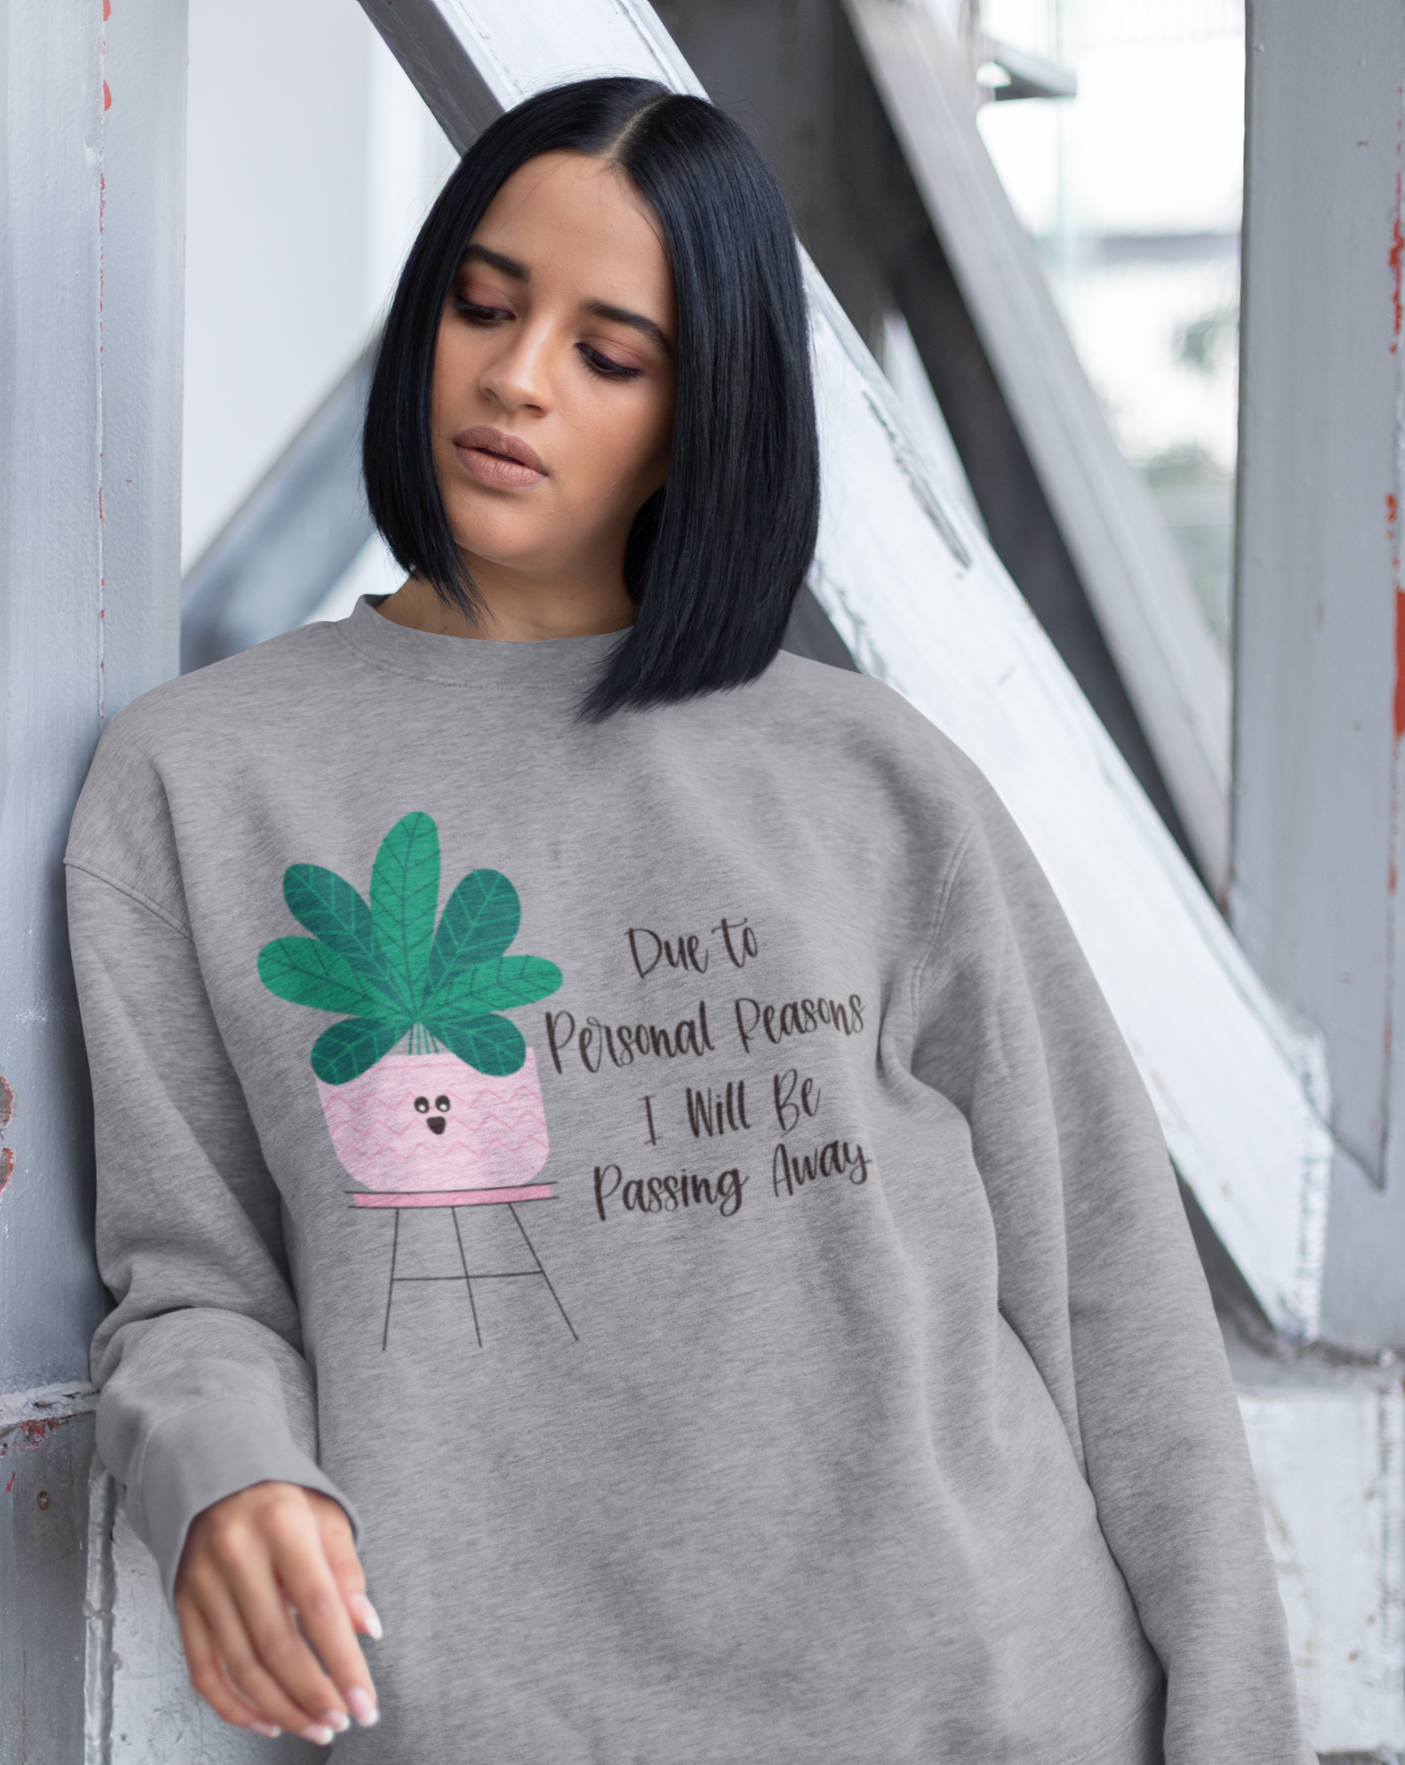 For personal reasons I will be passing away. Why is this every houseplant I’ve ever owned?! If you’re like me and can’t keep a houseplant alive, and it’s not your fault, this crewneck sweatshirt is perfect for you! Stay cozy while contemplating why all your plants are dying in this comfy sweatshirt!